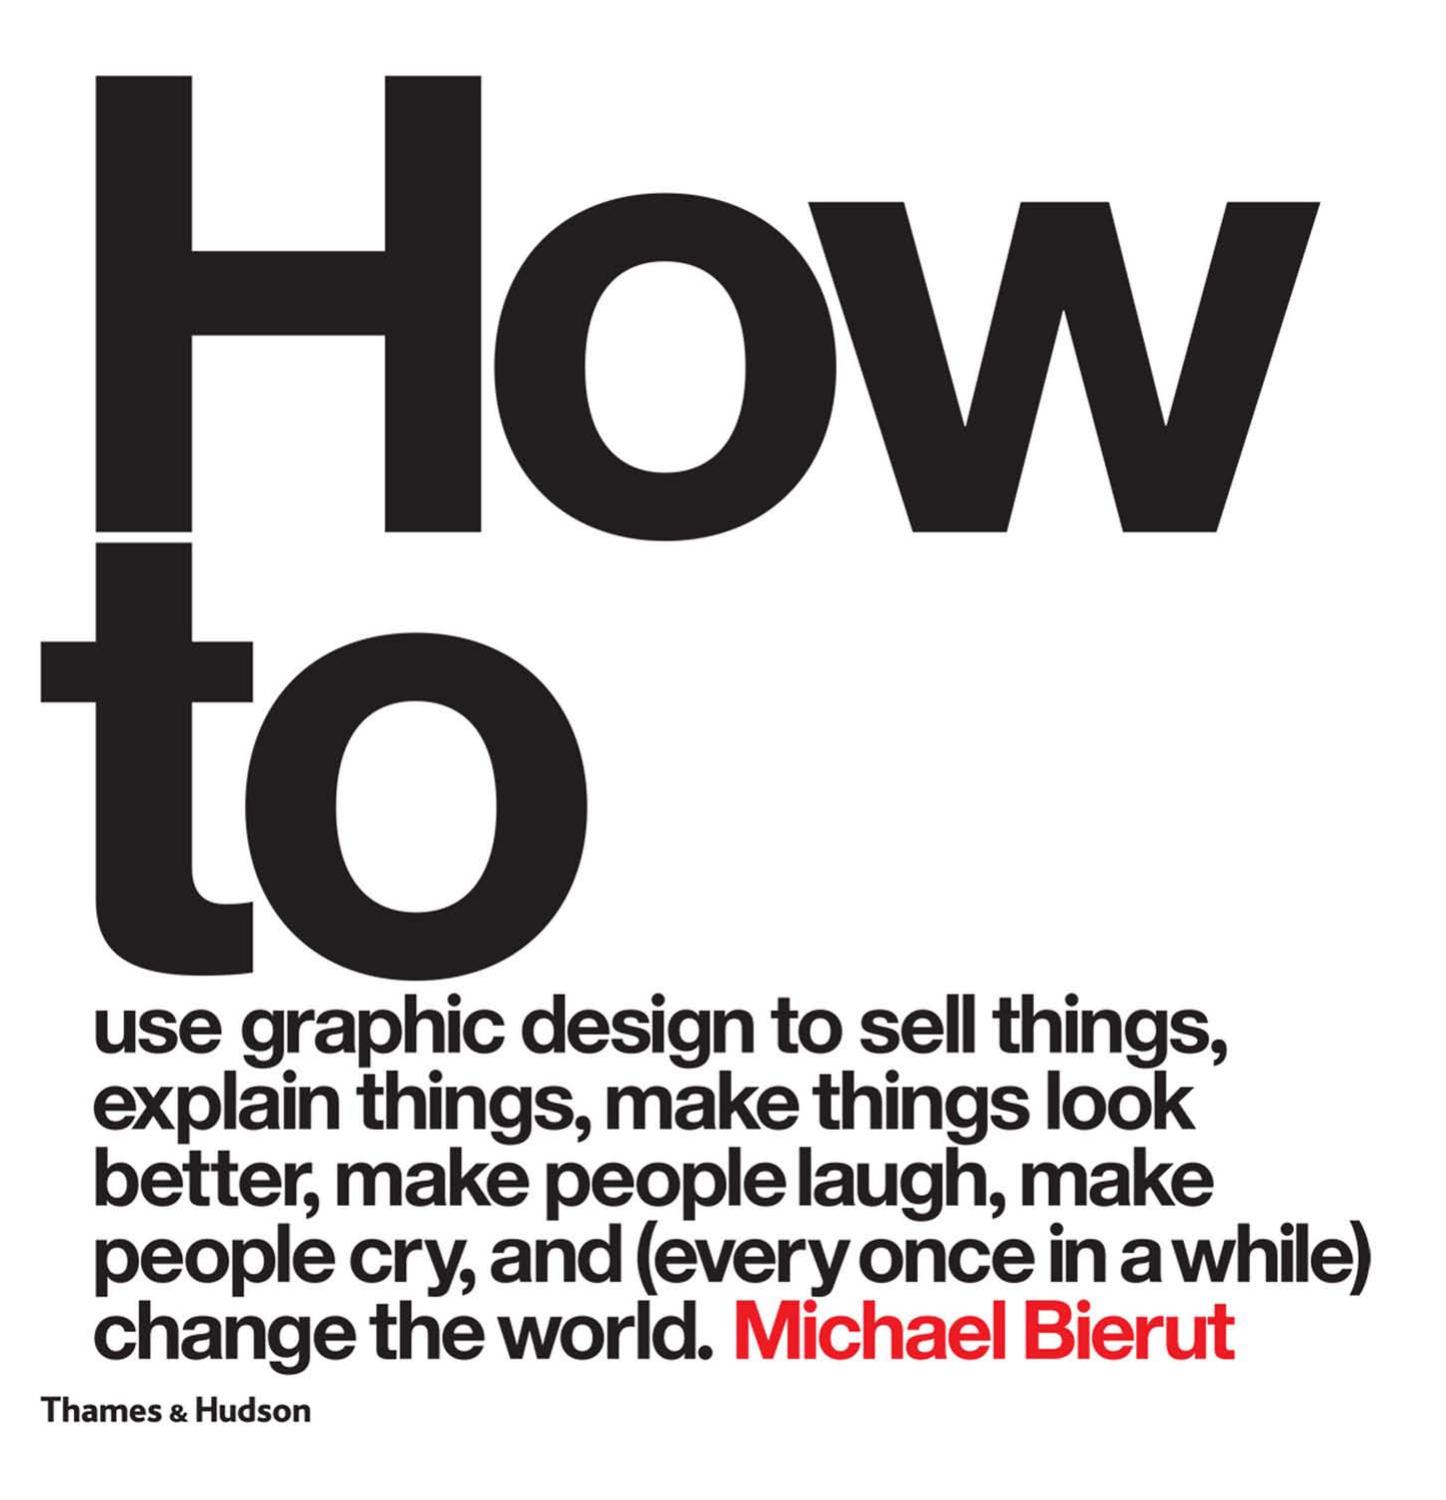 How to Use Graphic Design to Sell Things, Explain Things, Make Things Look Better, Make People Laugh, Make People Cry, and (every Once in a While) Change the World by Michael Bierut